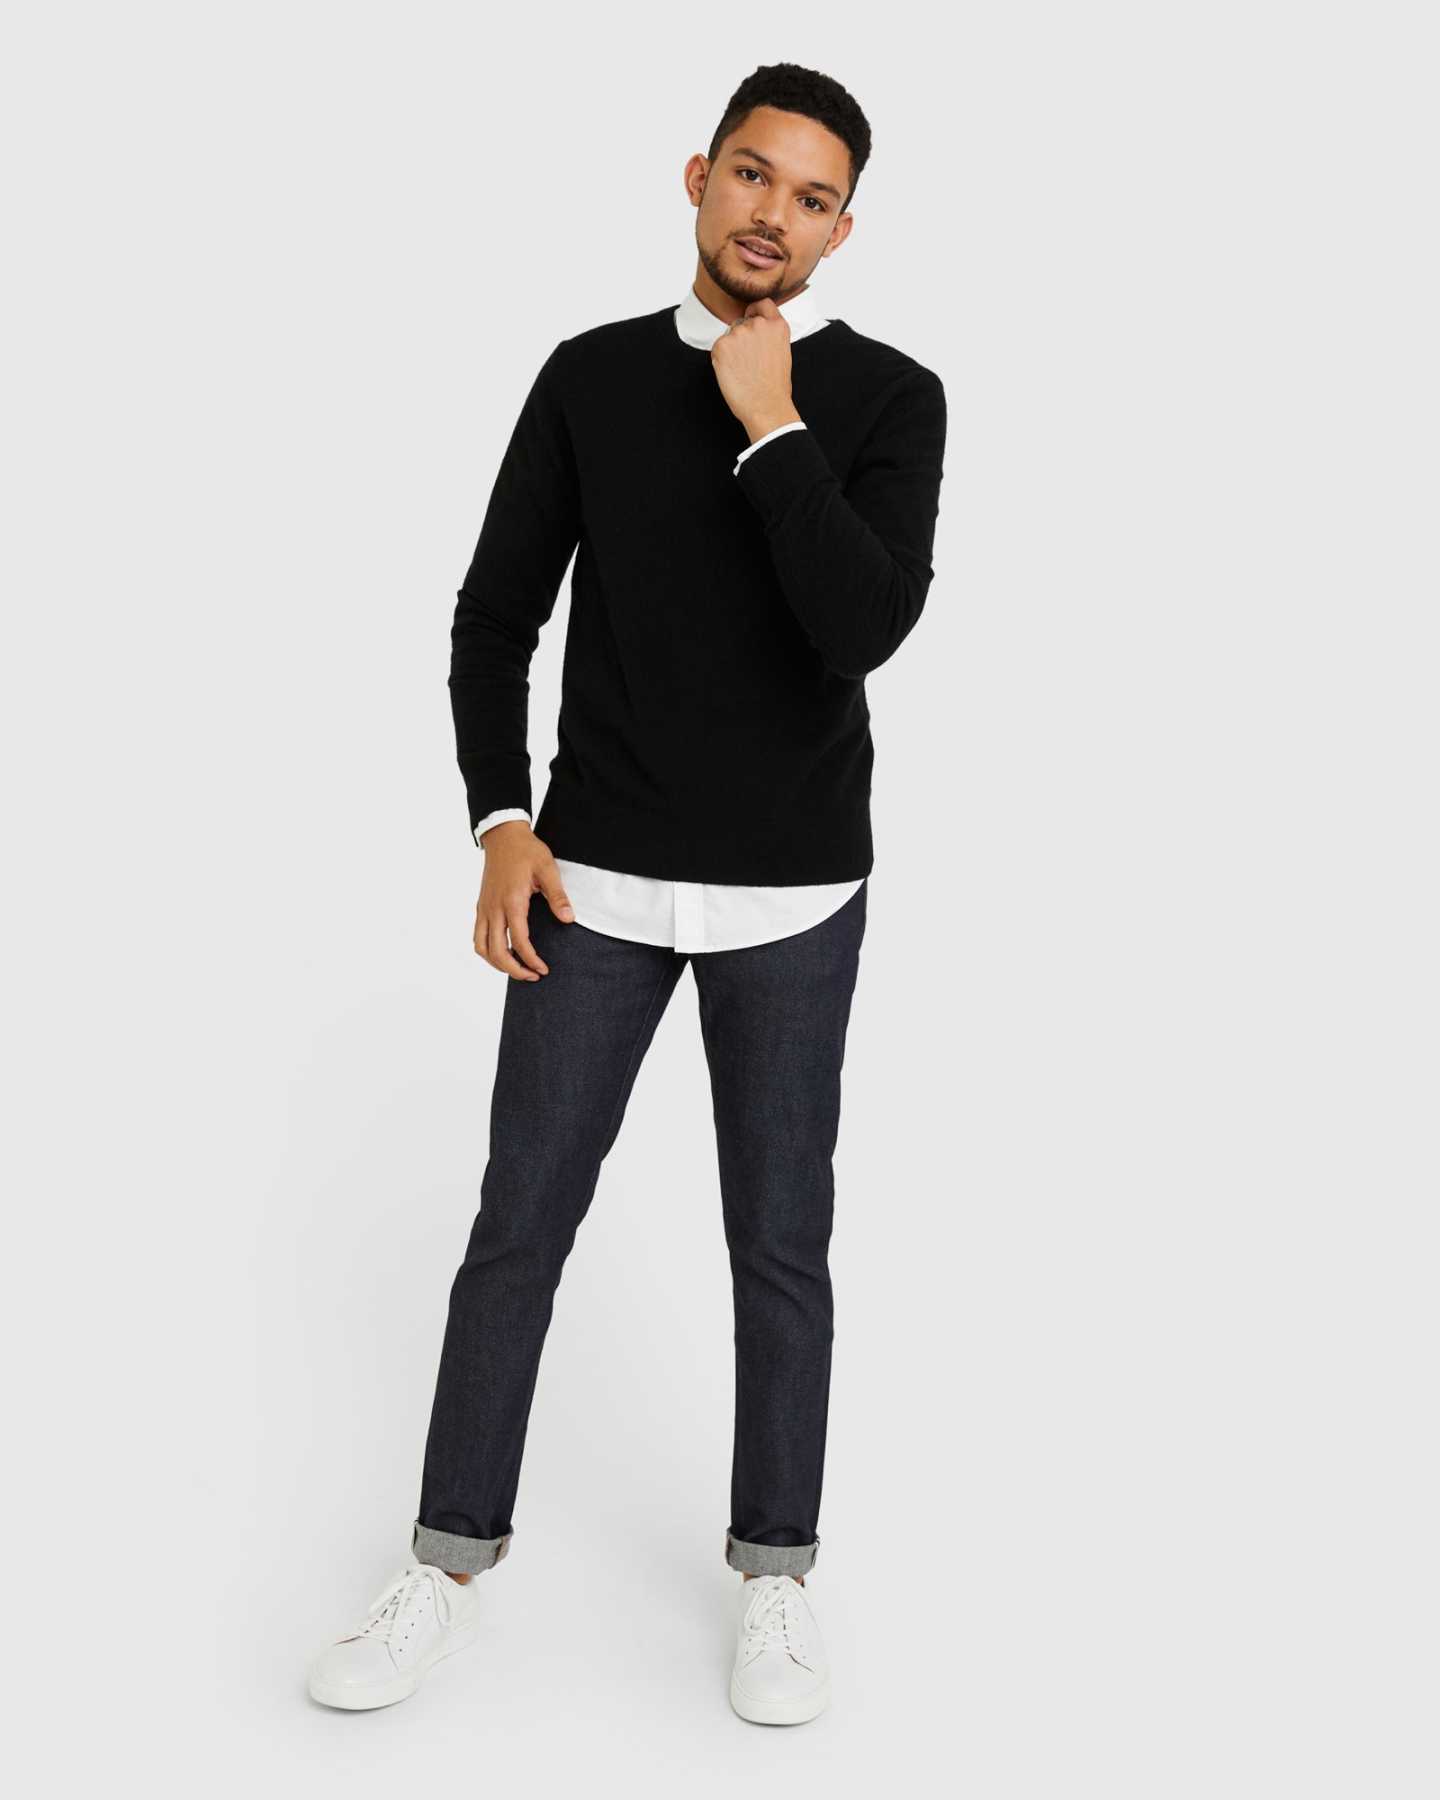 Man wearing black men's cashmere sweater from distance